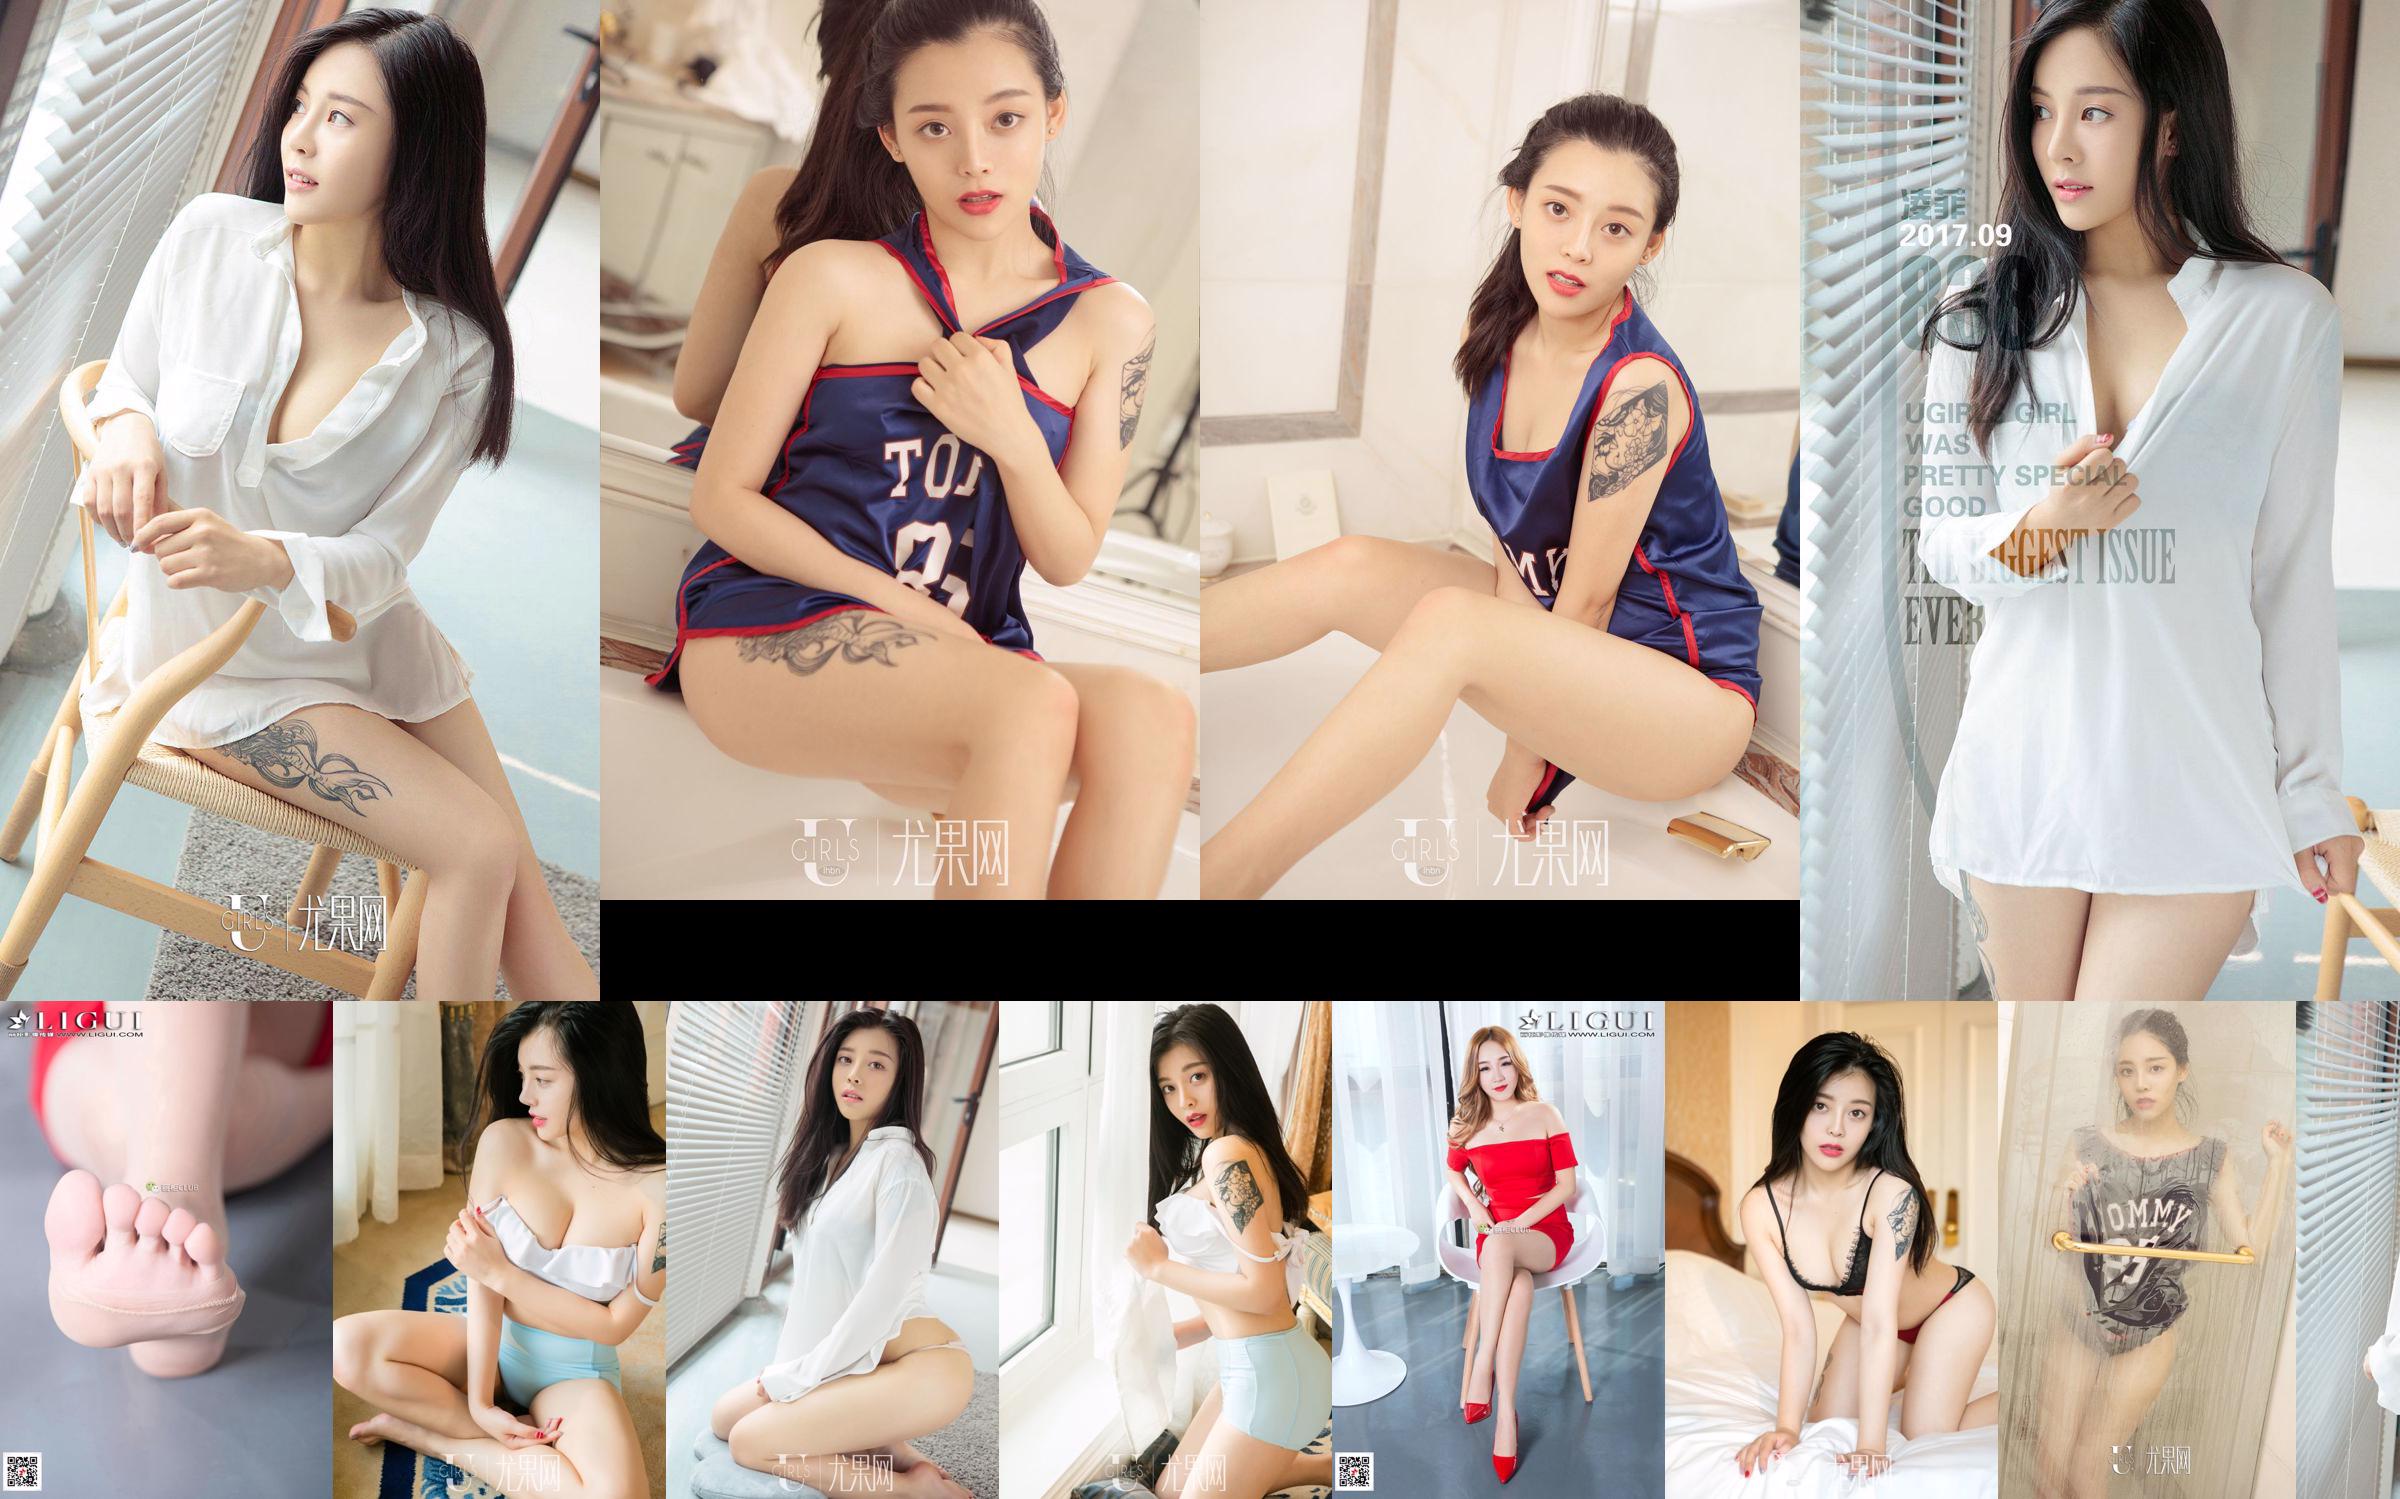 Model Ling Fei "Meat Stockings with Silky Feet and Beautiful Legs" [Ligui Ligui] No.f21972 Page 2